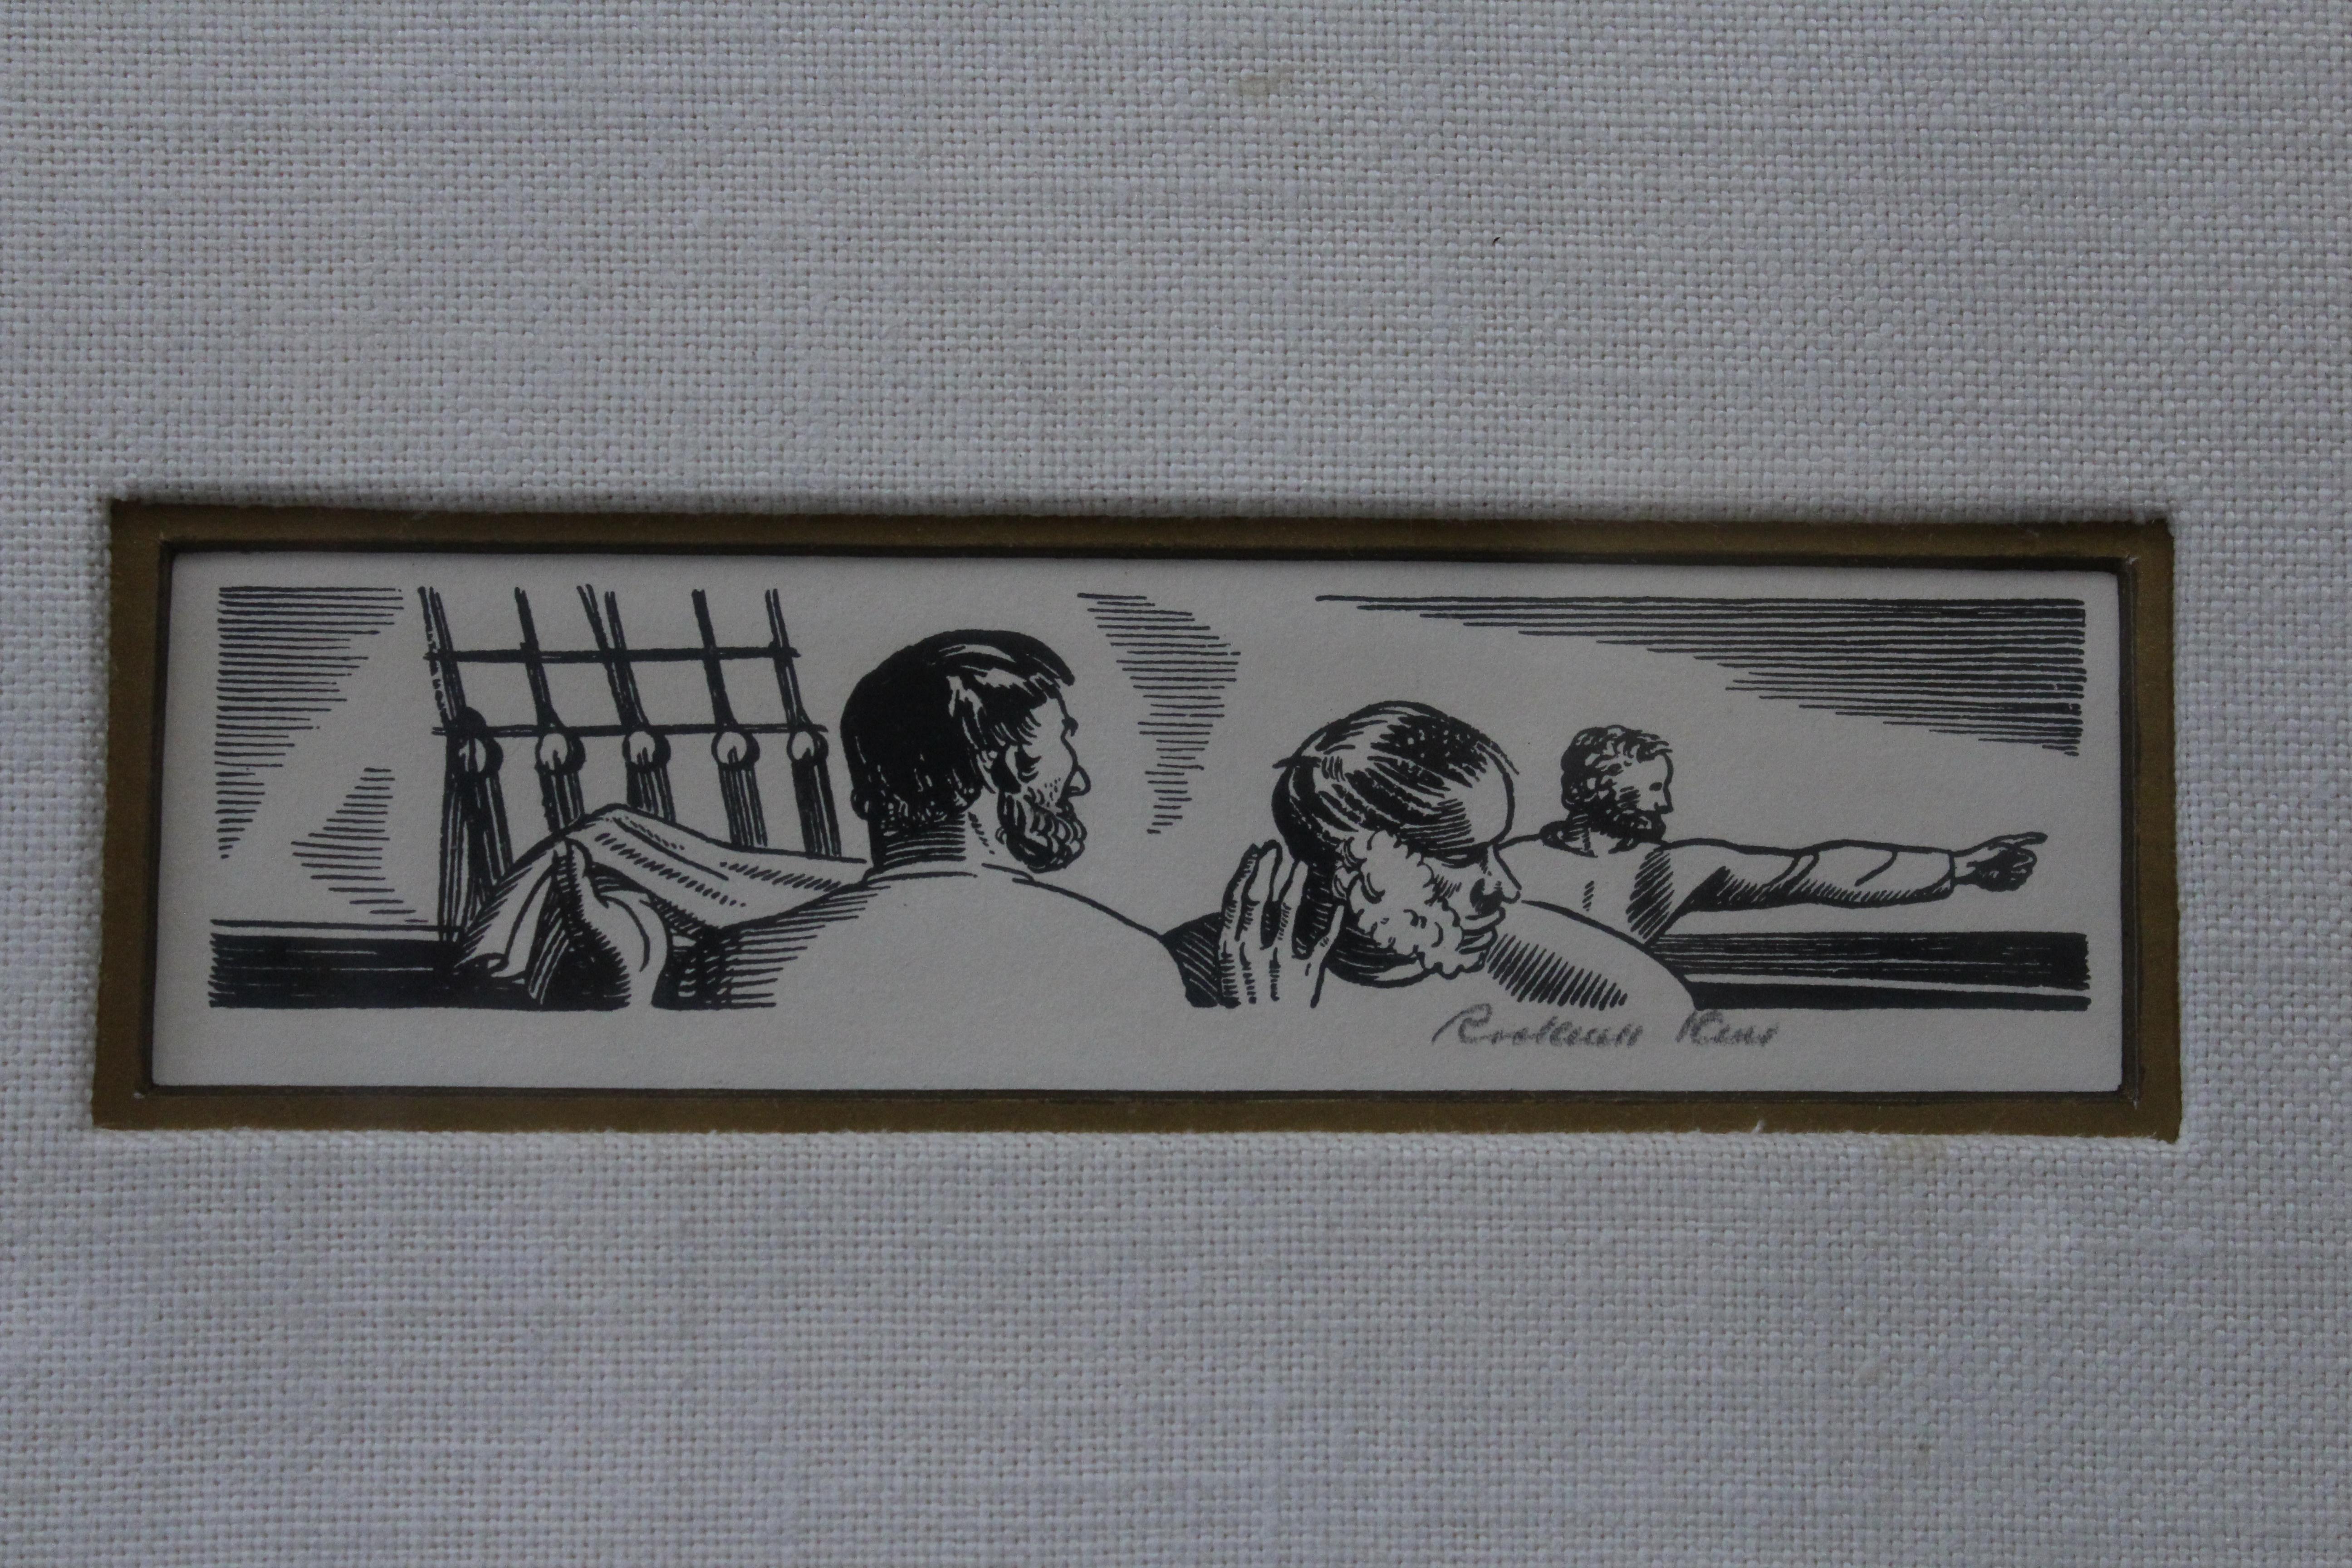 Rockwell Kent 1930s pencil signed lithograph from Herman Melville's Moby Dick. Matted in off-white linen with black and silver frame.